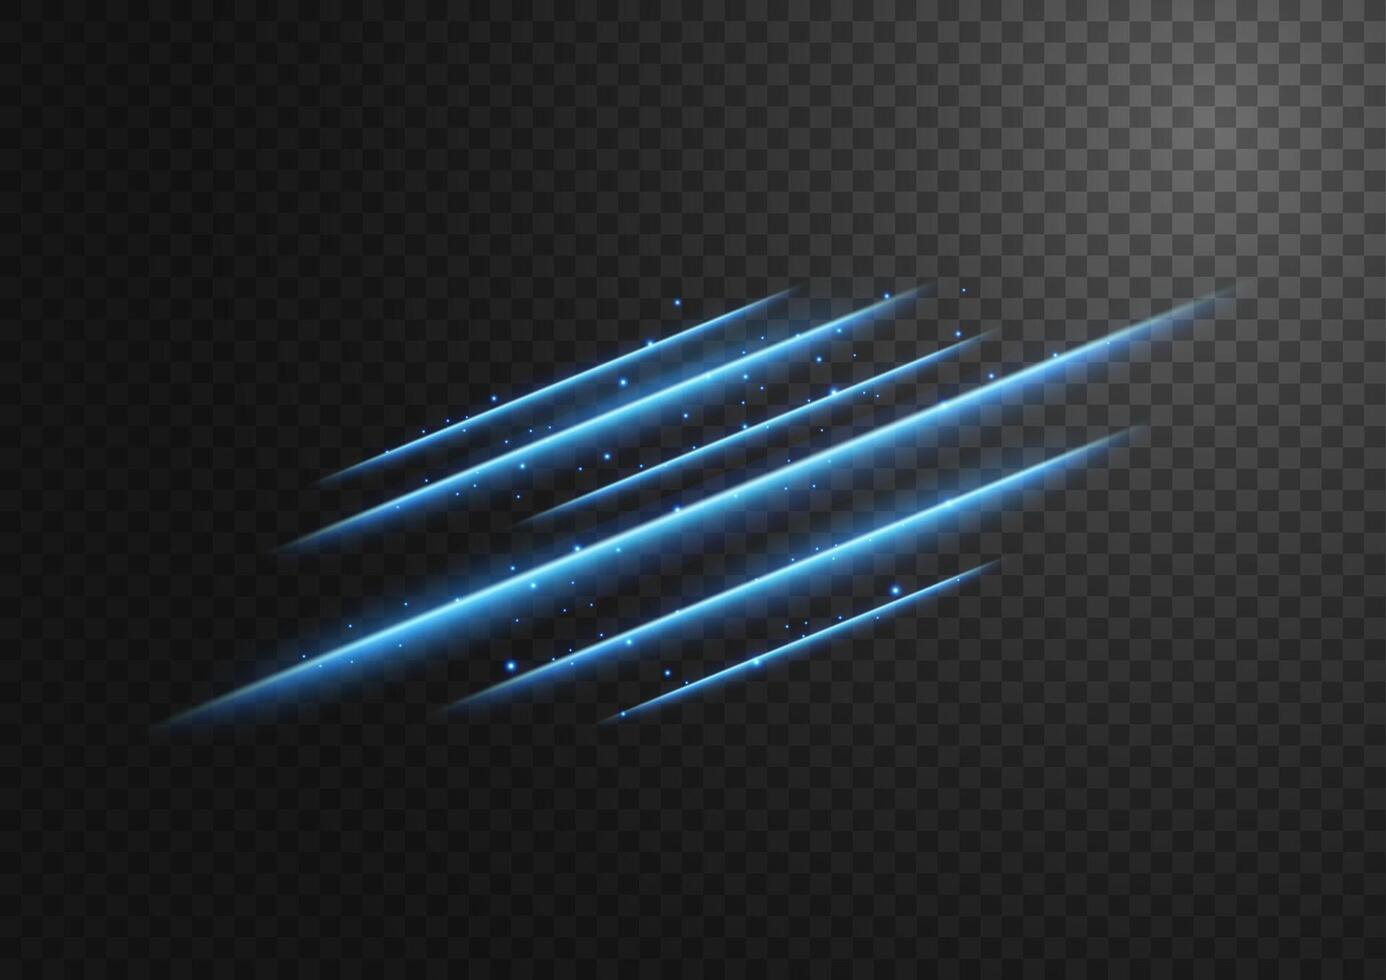 Abstract Blue Line of Light with Blue Sparks, on A Background, Isolated and Easy to Edit, Vector Illustration